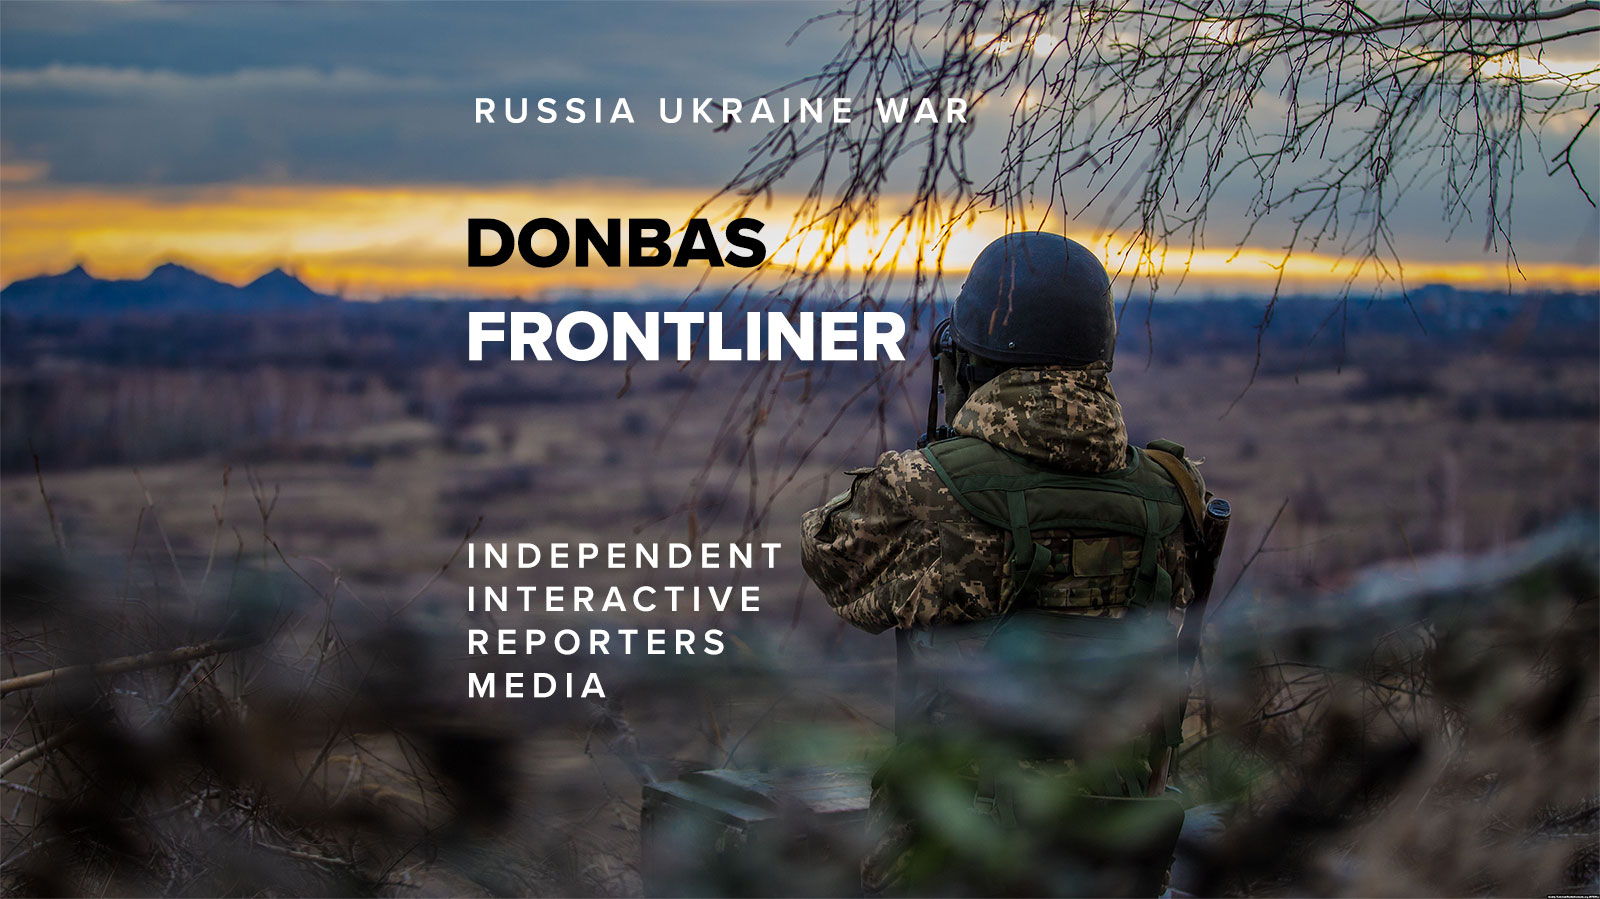 Donbas Frontliner reporters media project about Russian-Ukraine hybrid war 2021